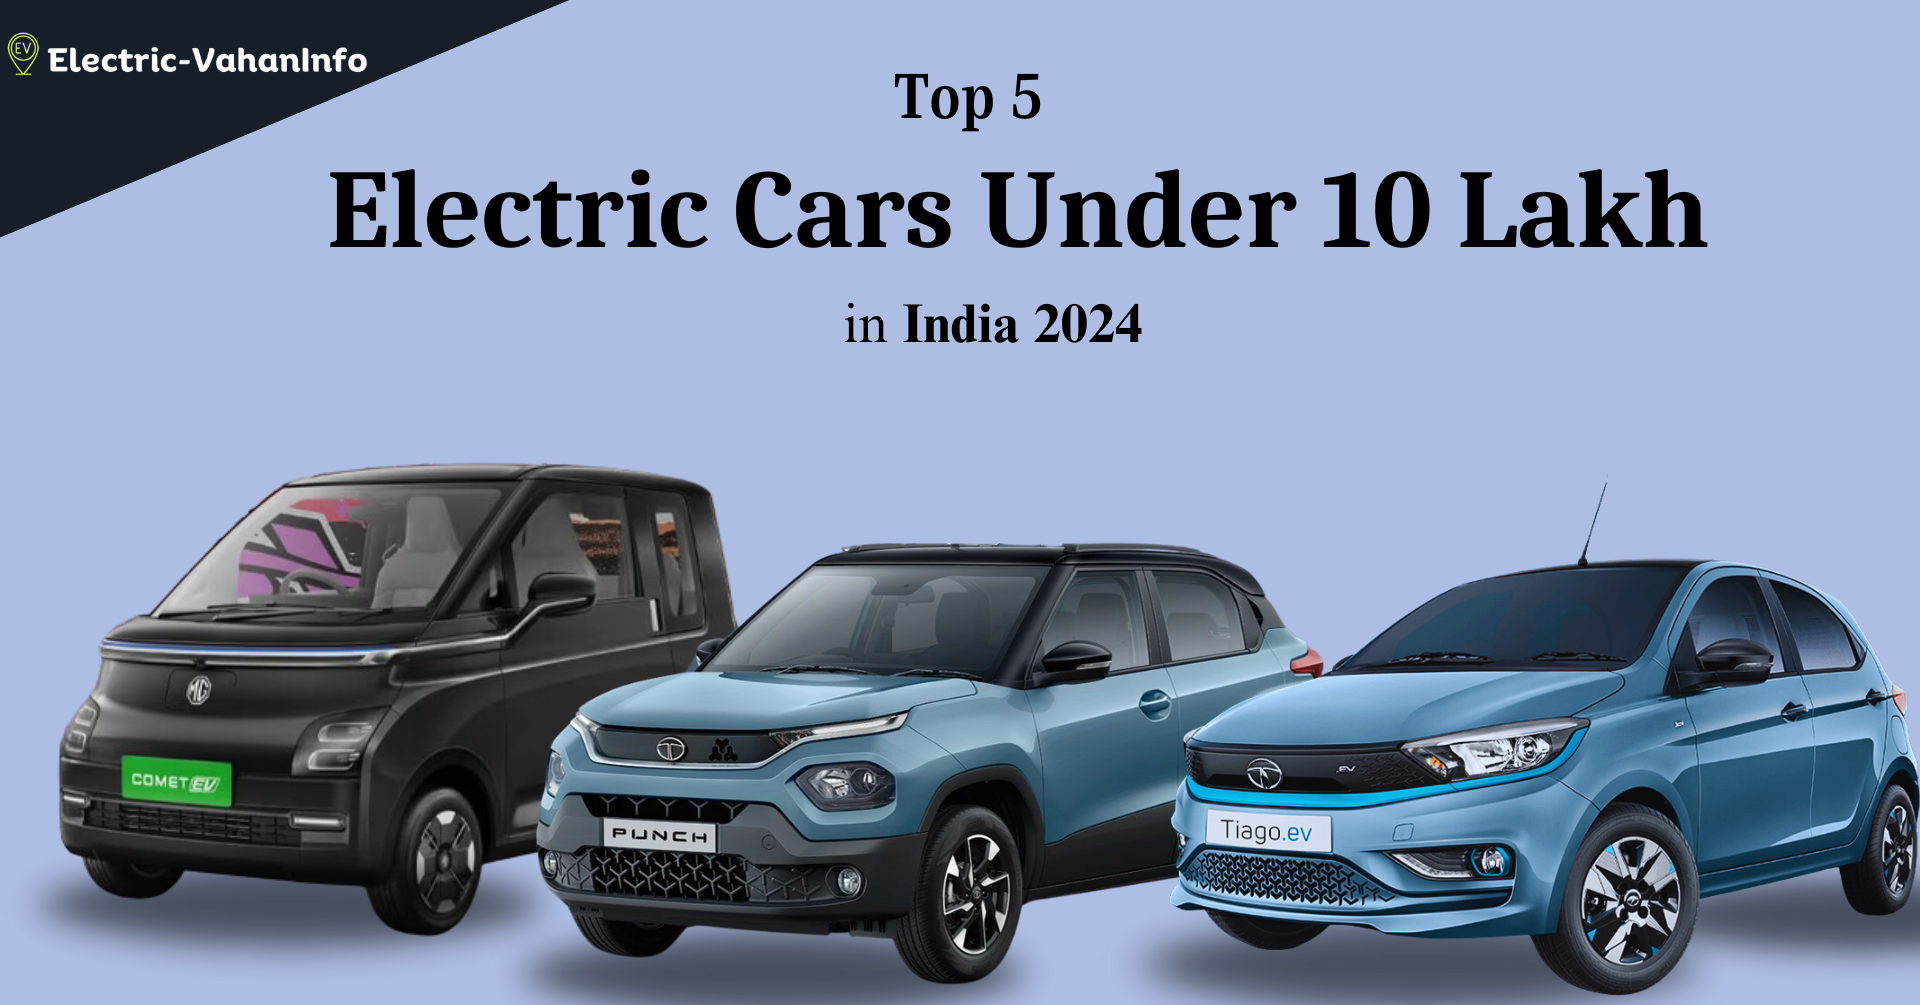 https://electric-vahaninfo.com/top-5-electric-cars-under-10-lakh-in-india-2024/